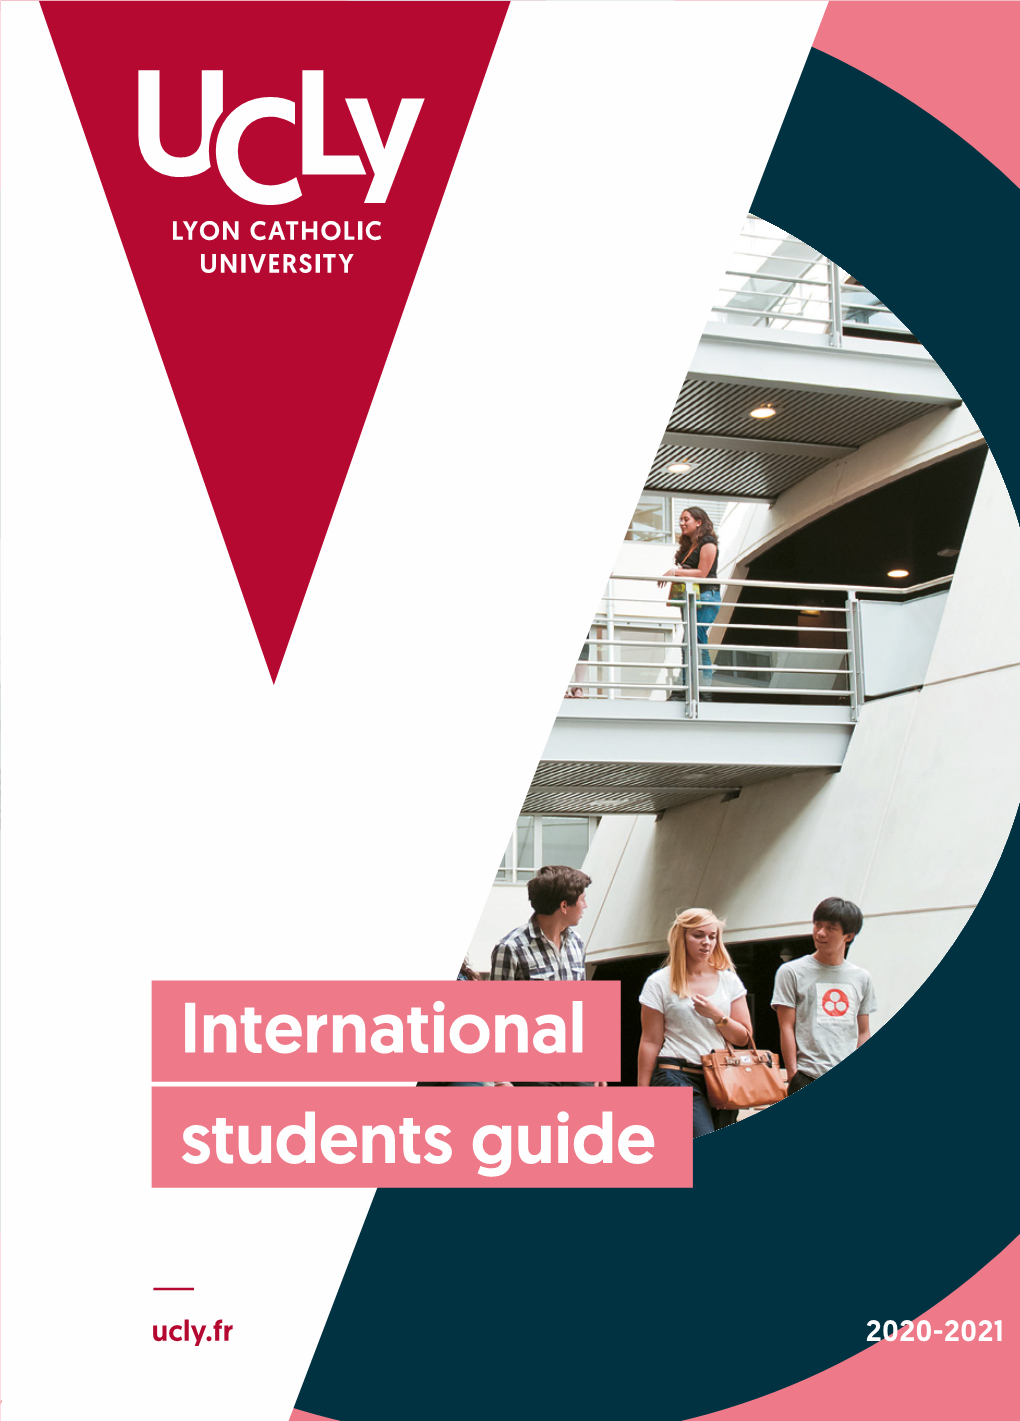 International Students Guide